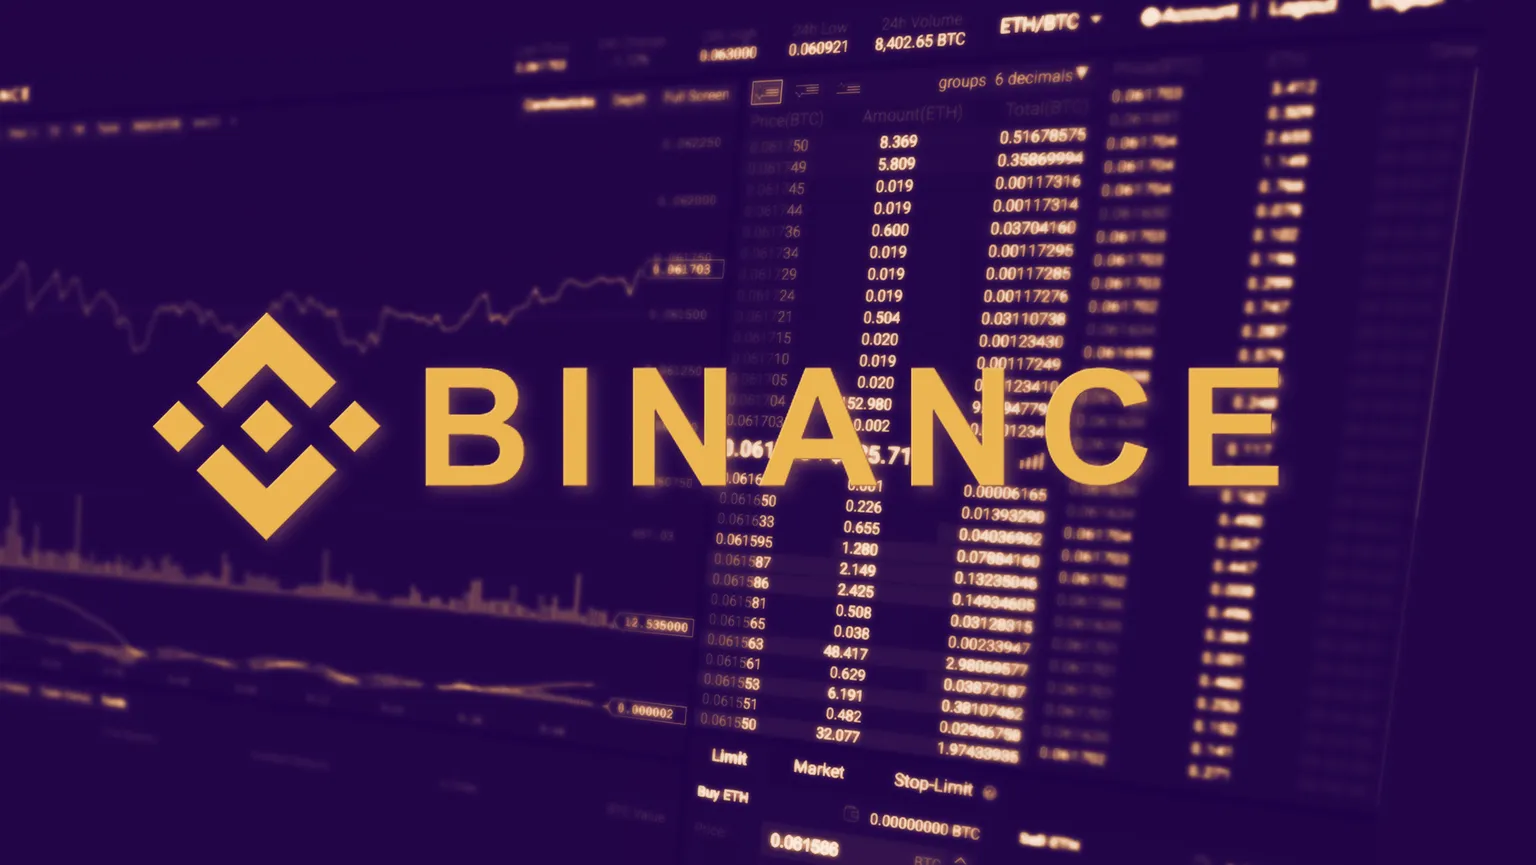 Binance is one of the largest cryptocurrency exchanges in the world (Image: Shutterstock)